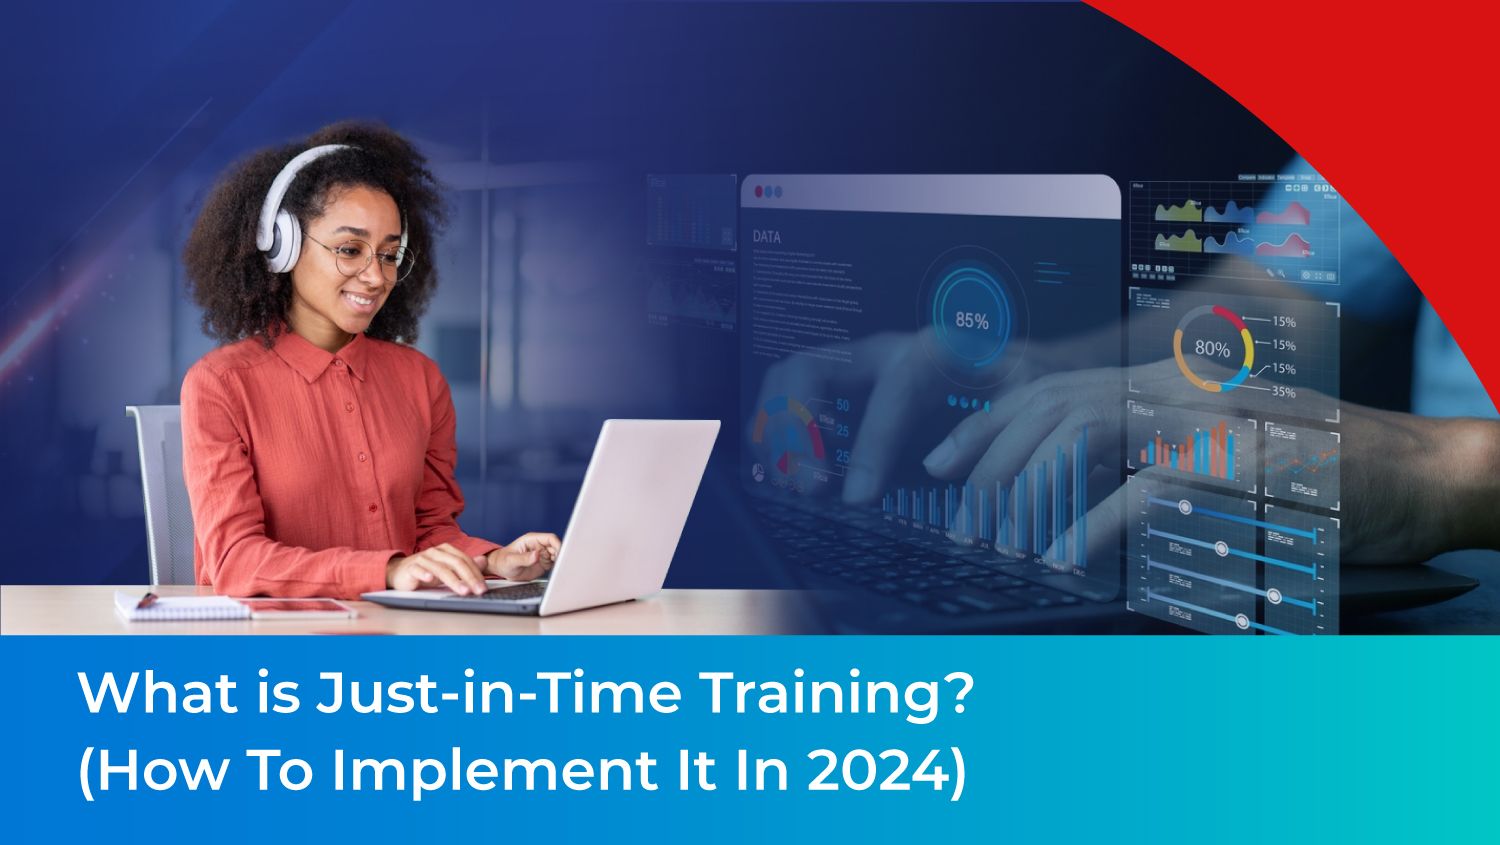 What is Just-in-Time Training?(How To Implement It In 2024)